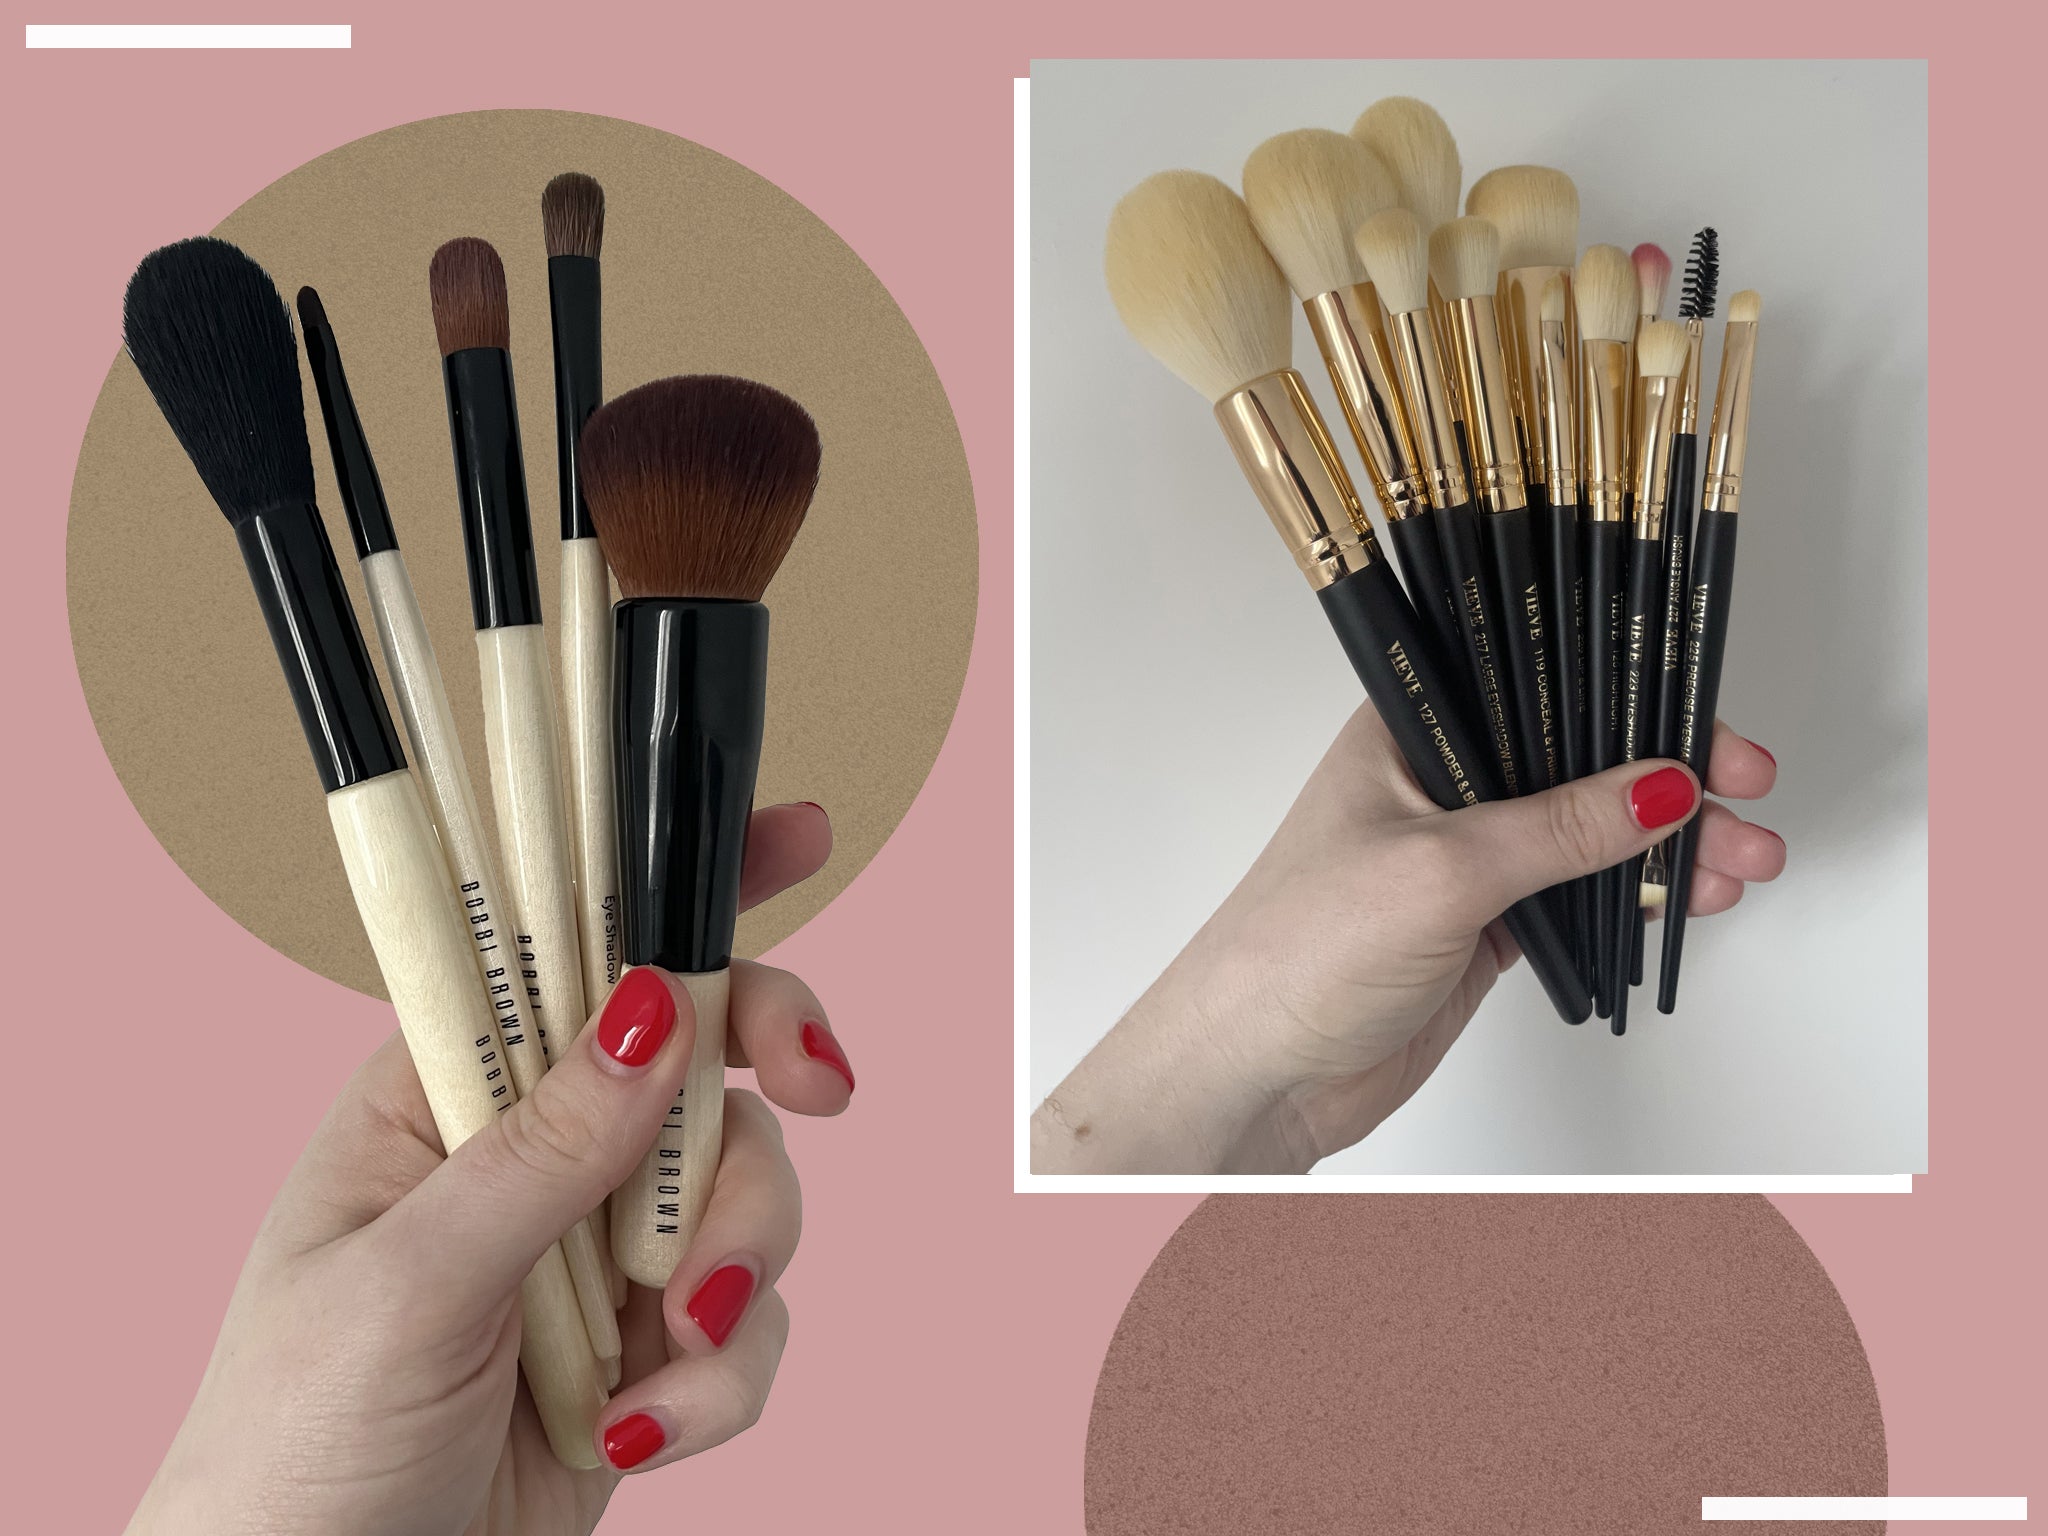 Creamy formulas are best applied with densely packed brushes, while powder works well with fluffier styles